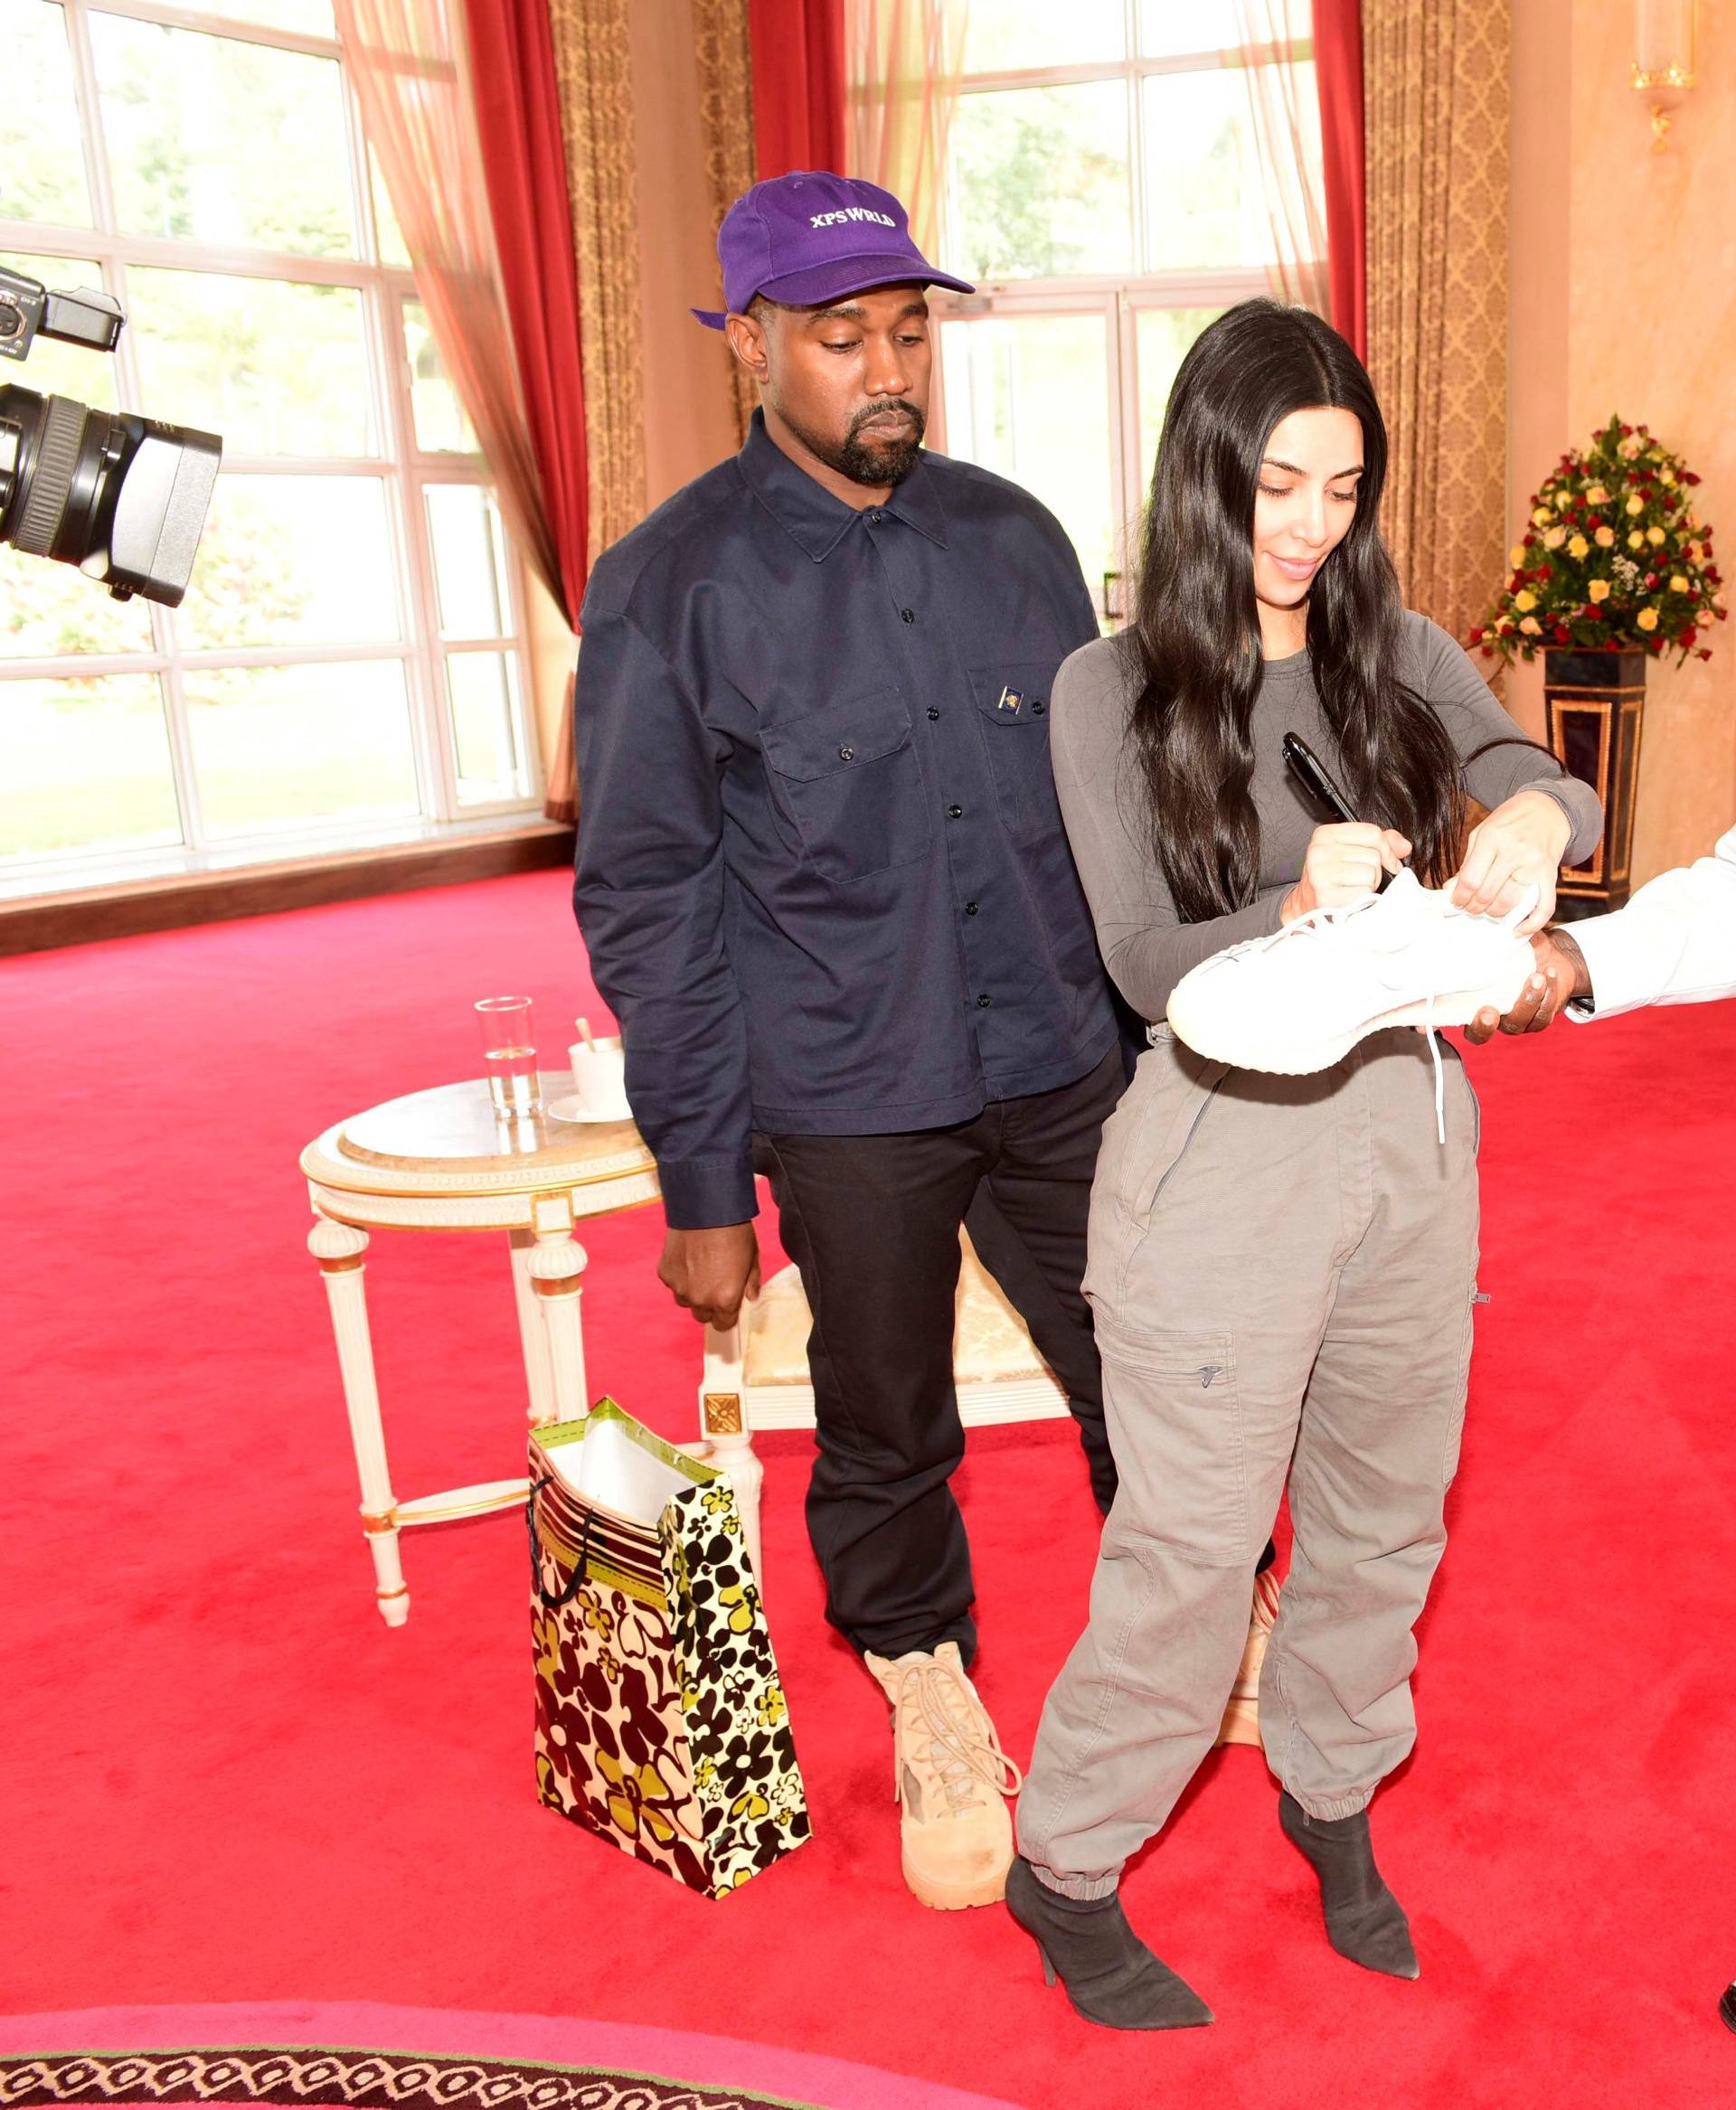 Kim Kardashian autographs a shoe for Uganda's President Yoweri Museveni as Rapper Kanye West looks on when they paid a courtesy call at State House, Entebbe